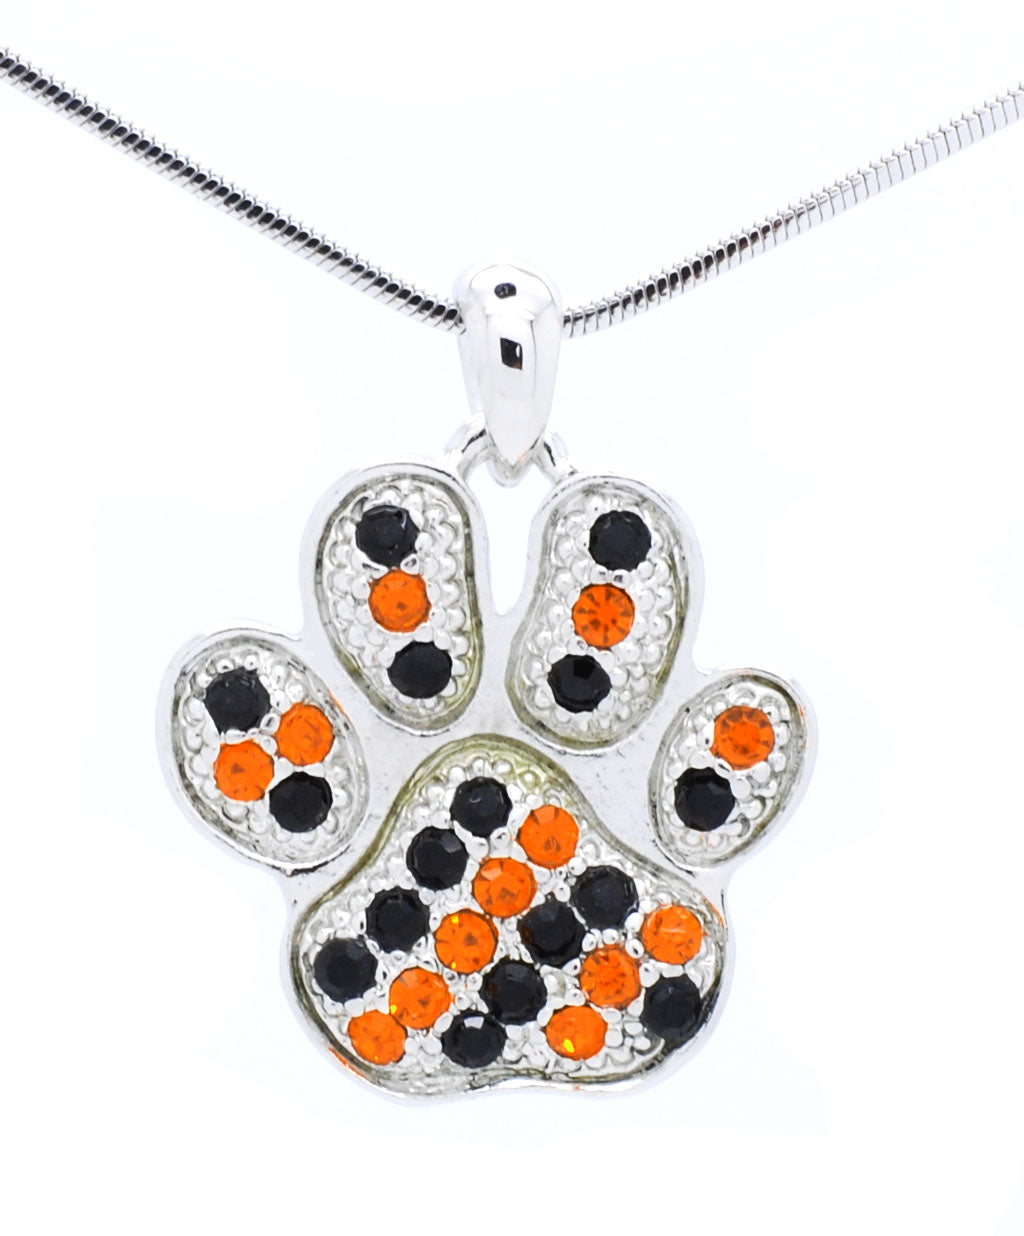 Paw Print Necklace - Large